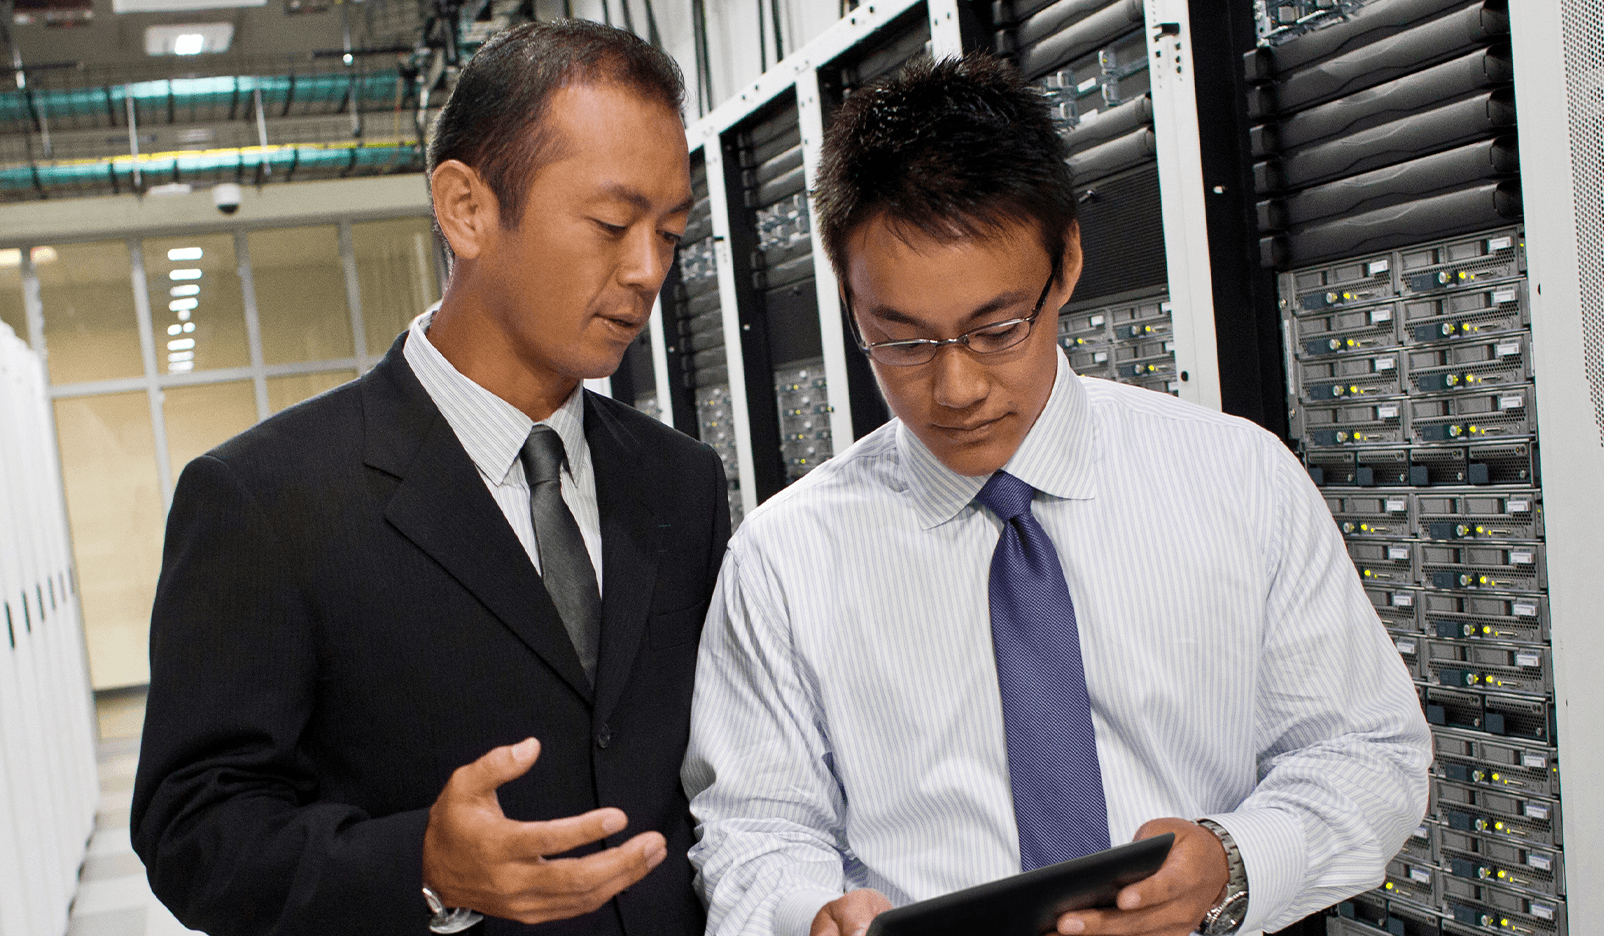 two men working in a data center